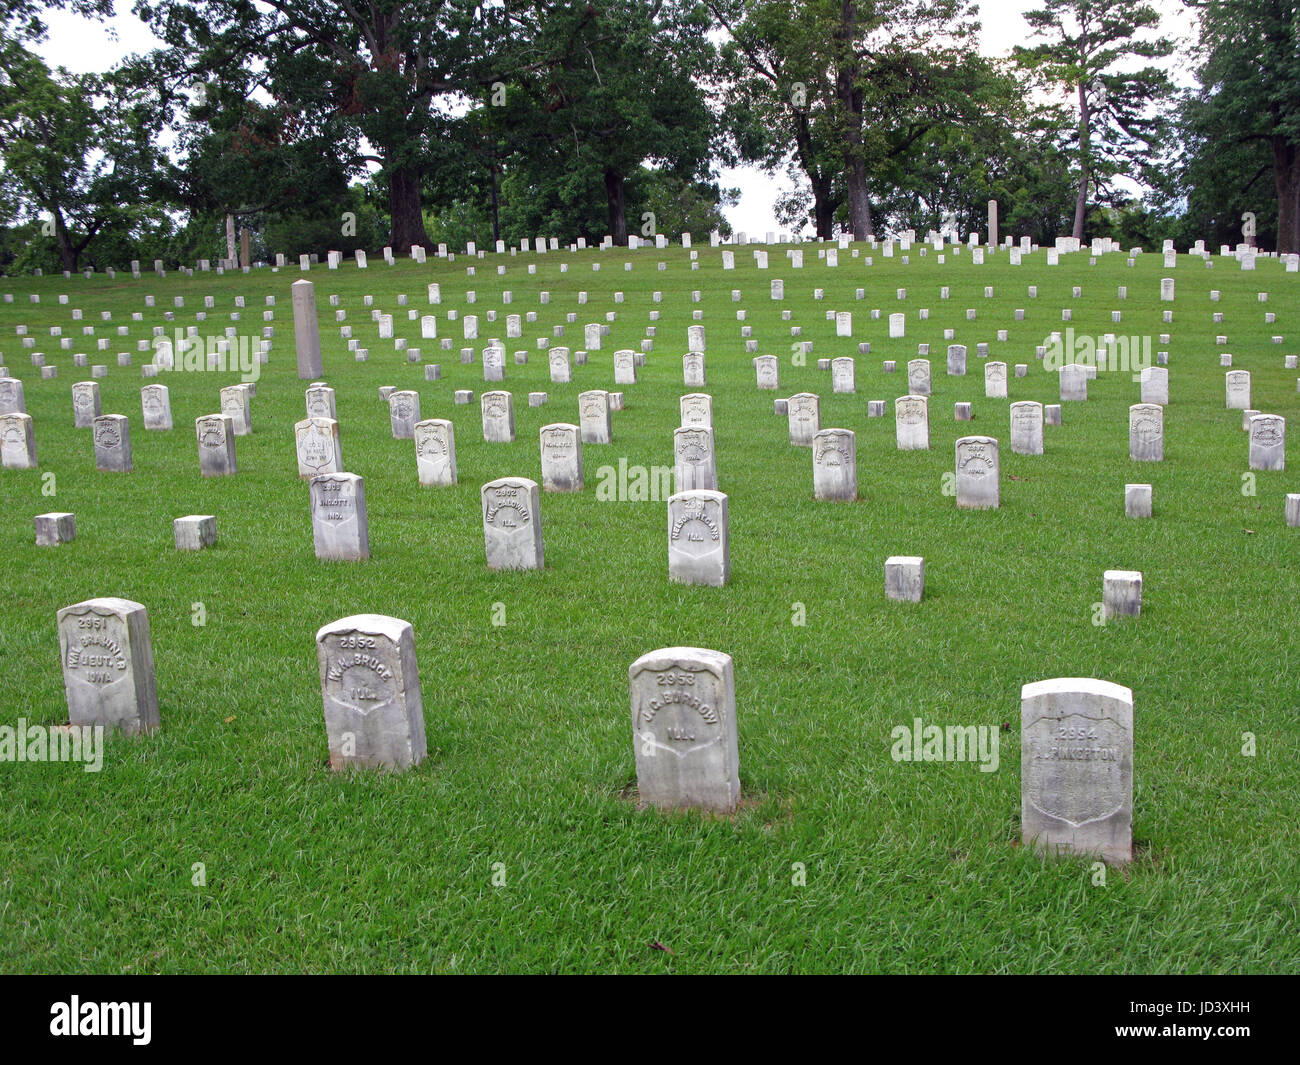 Shiloh National Cemetery in Shiloh, Tennessee contains the remains of 3,584 Union Soldiers who died in the battlefields of Shiloh. Stock Photo